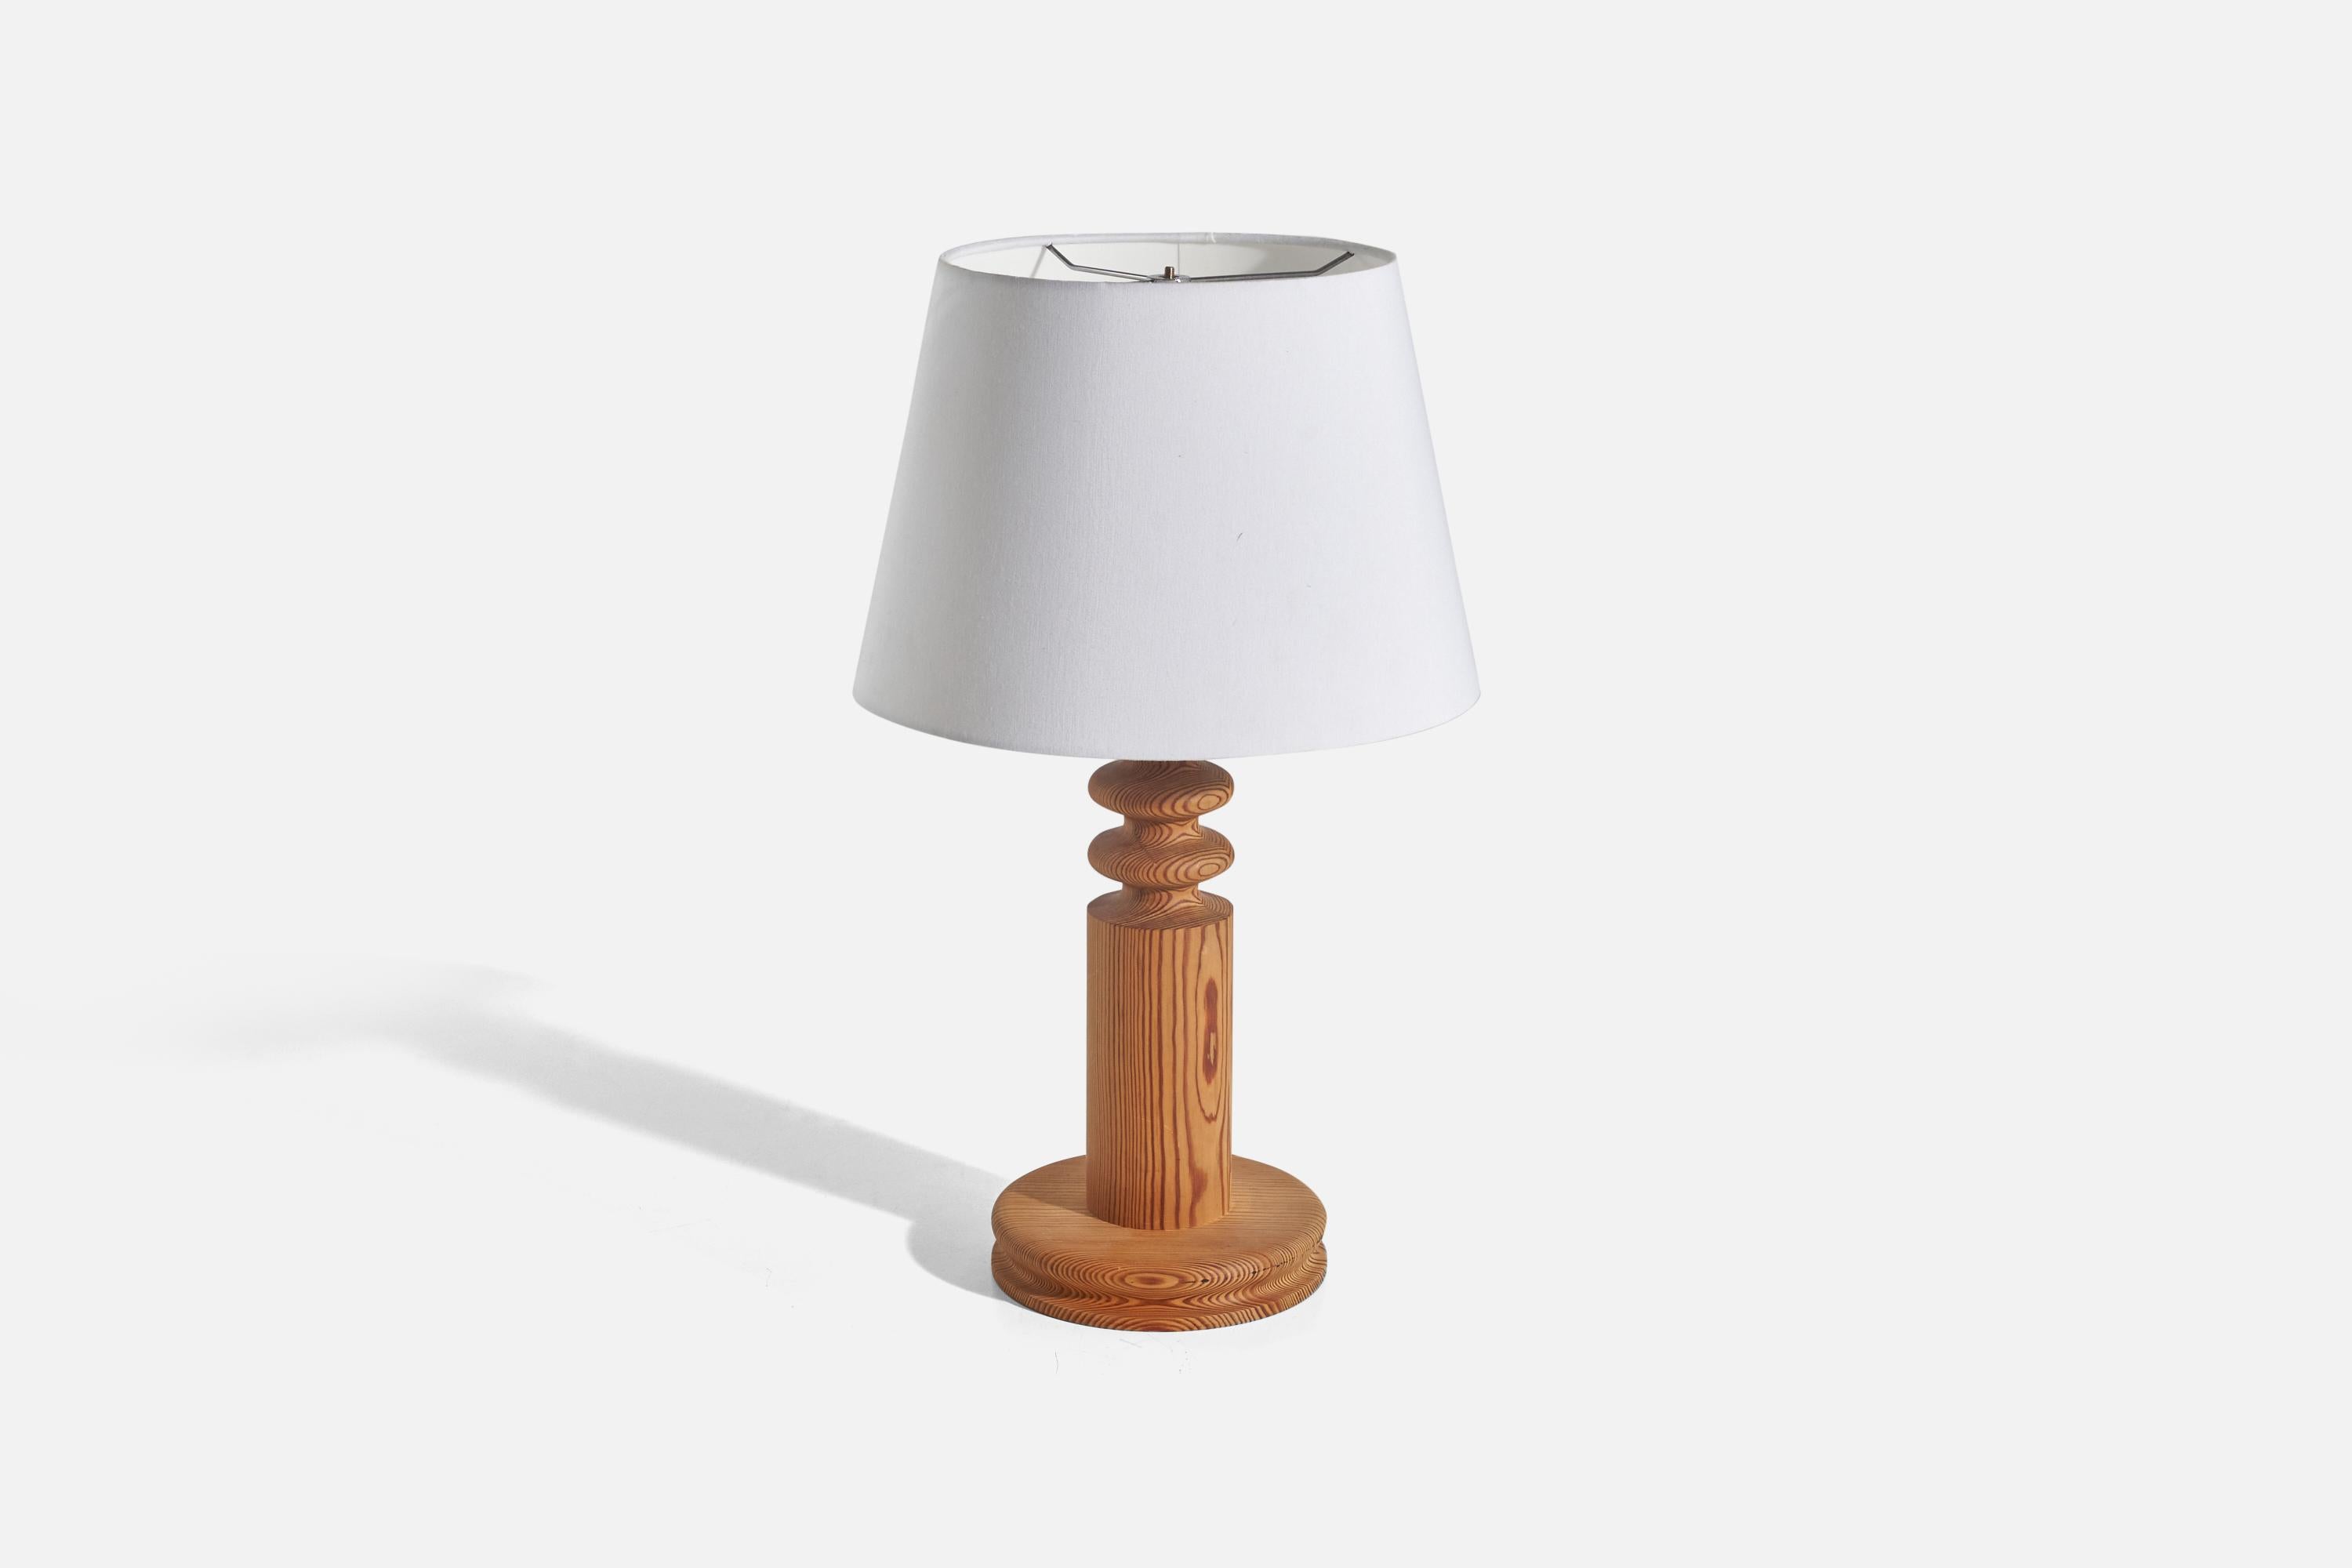 A solid pine table lamp designed by Uno Kristiansson and produced by Luxus, Sweden, 1960s.

Sold without lampshade(s)
Dimensions of lamp (inches) : 17.25 x 7.81 x 7.81 (height x width x depth)
Dimensions of shade (inches) : 10 x 14 x 9.87 (top